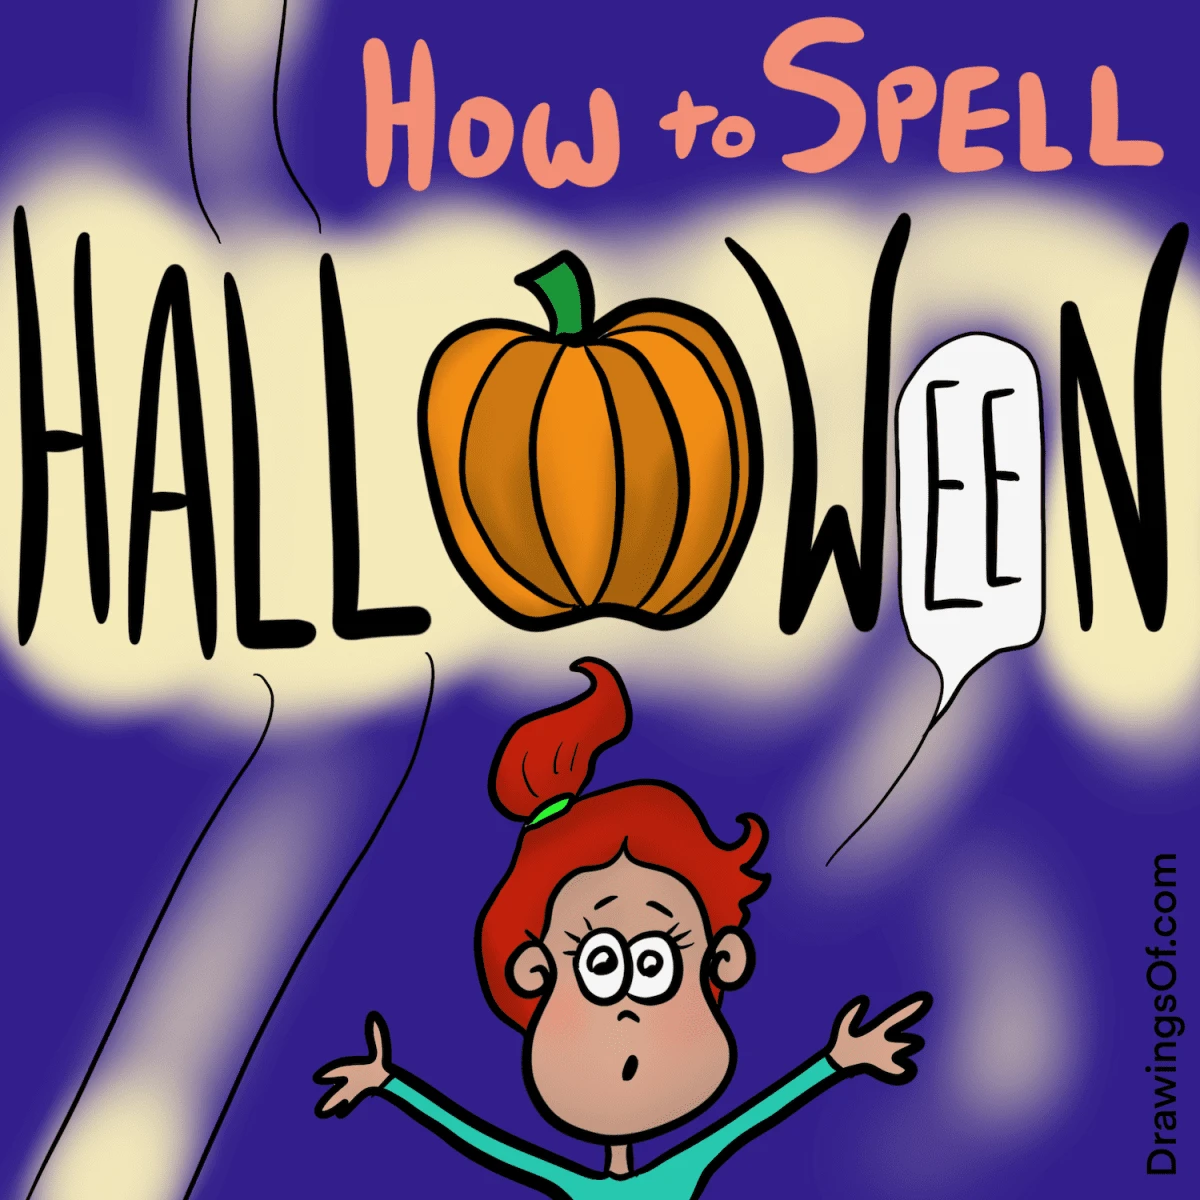 How to spell Halloween